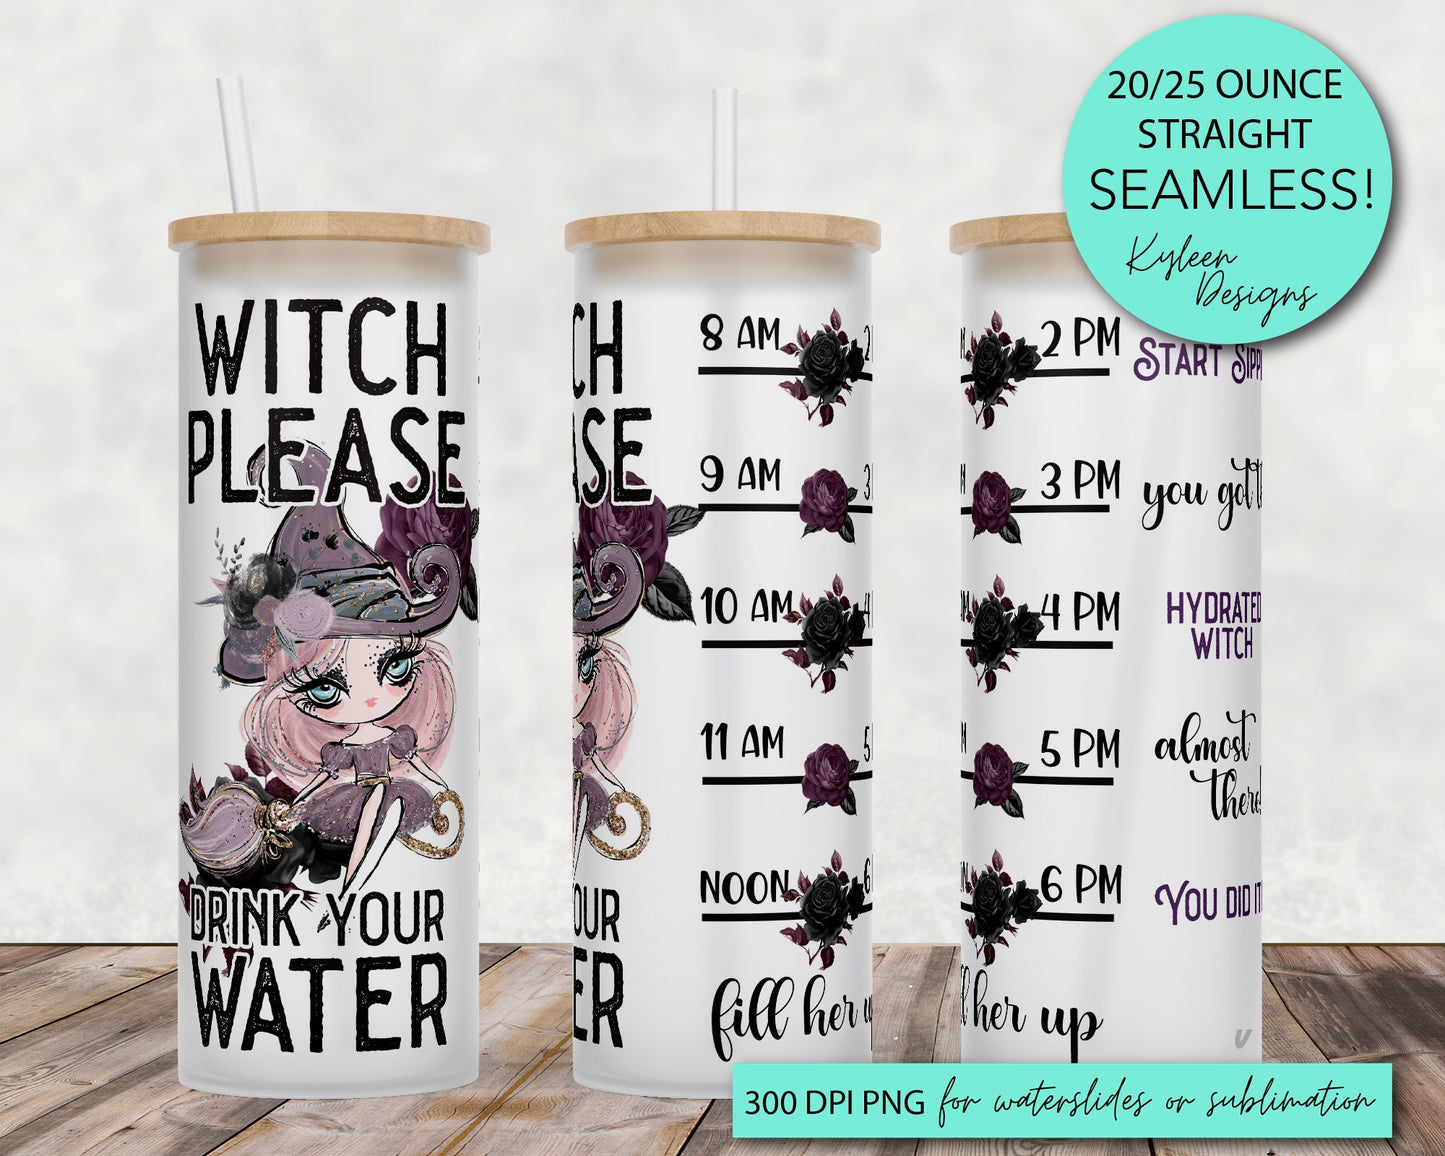 25 oz glass tumbler witch please drink your water Water tracker 20/25 ounce wrap for sublimation, waterslide High res PNG digital file